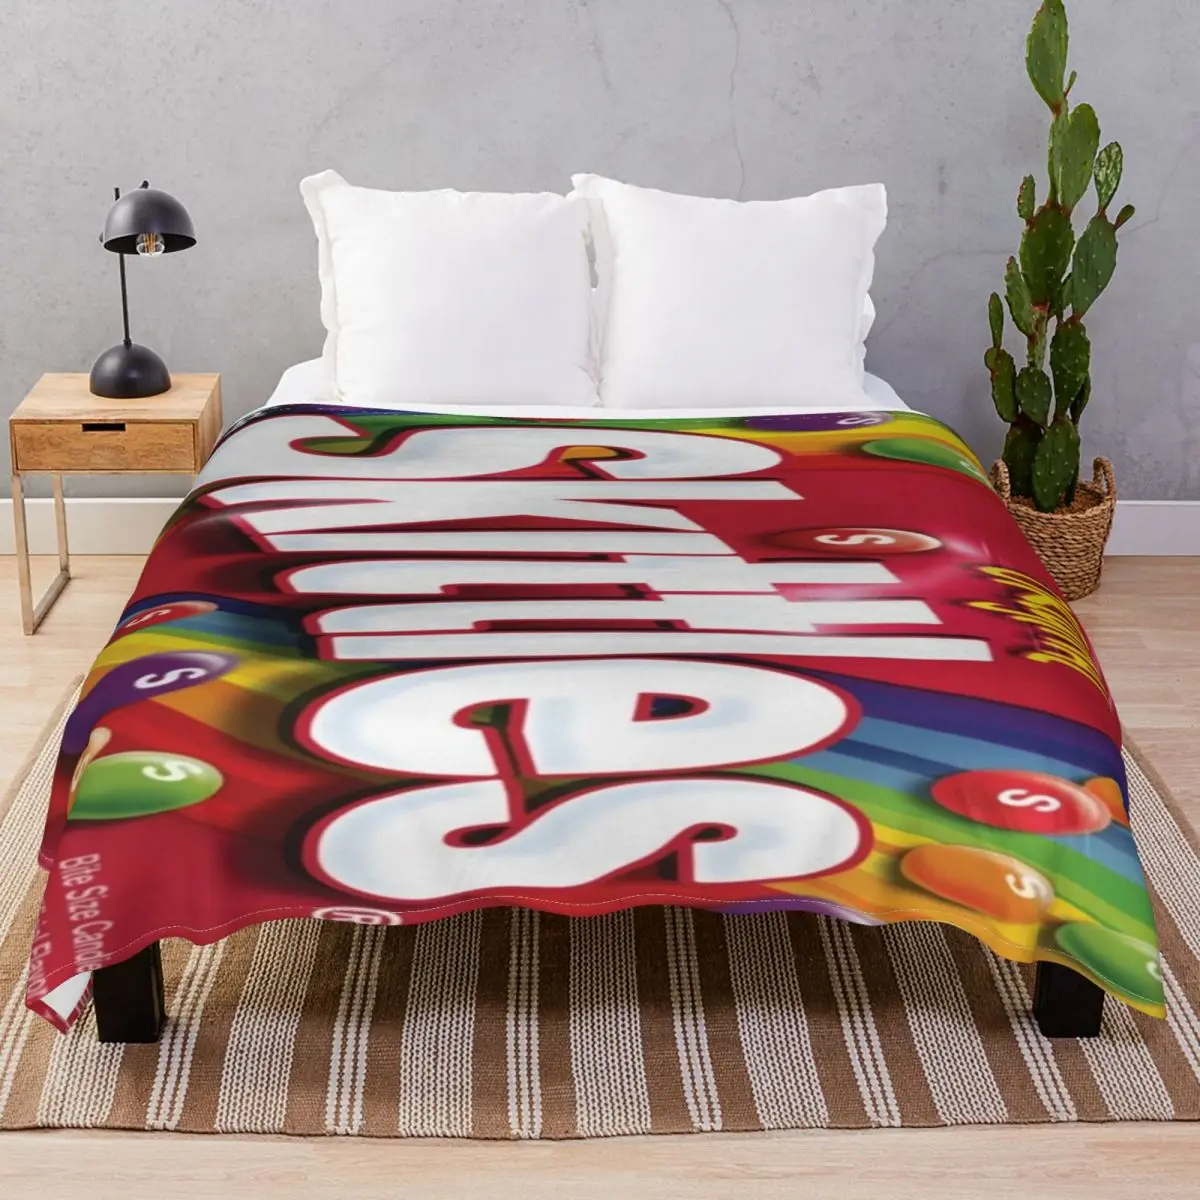 Skittles Blankets Flannel Winter Warm Throw Blanket for Bed Home Couch Camp Office